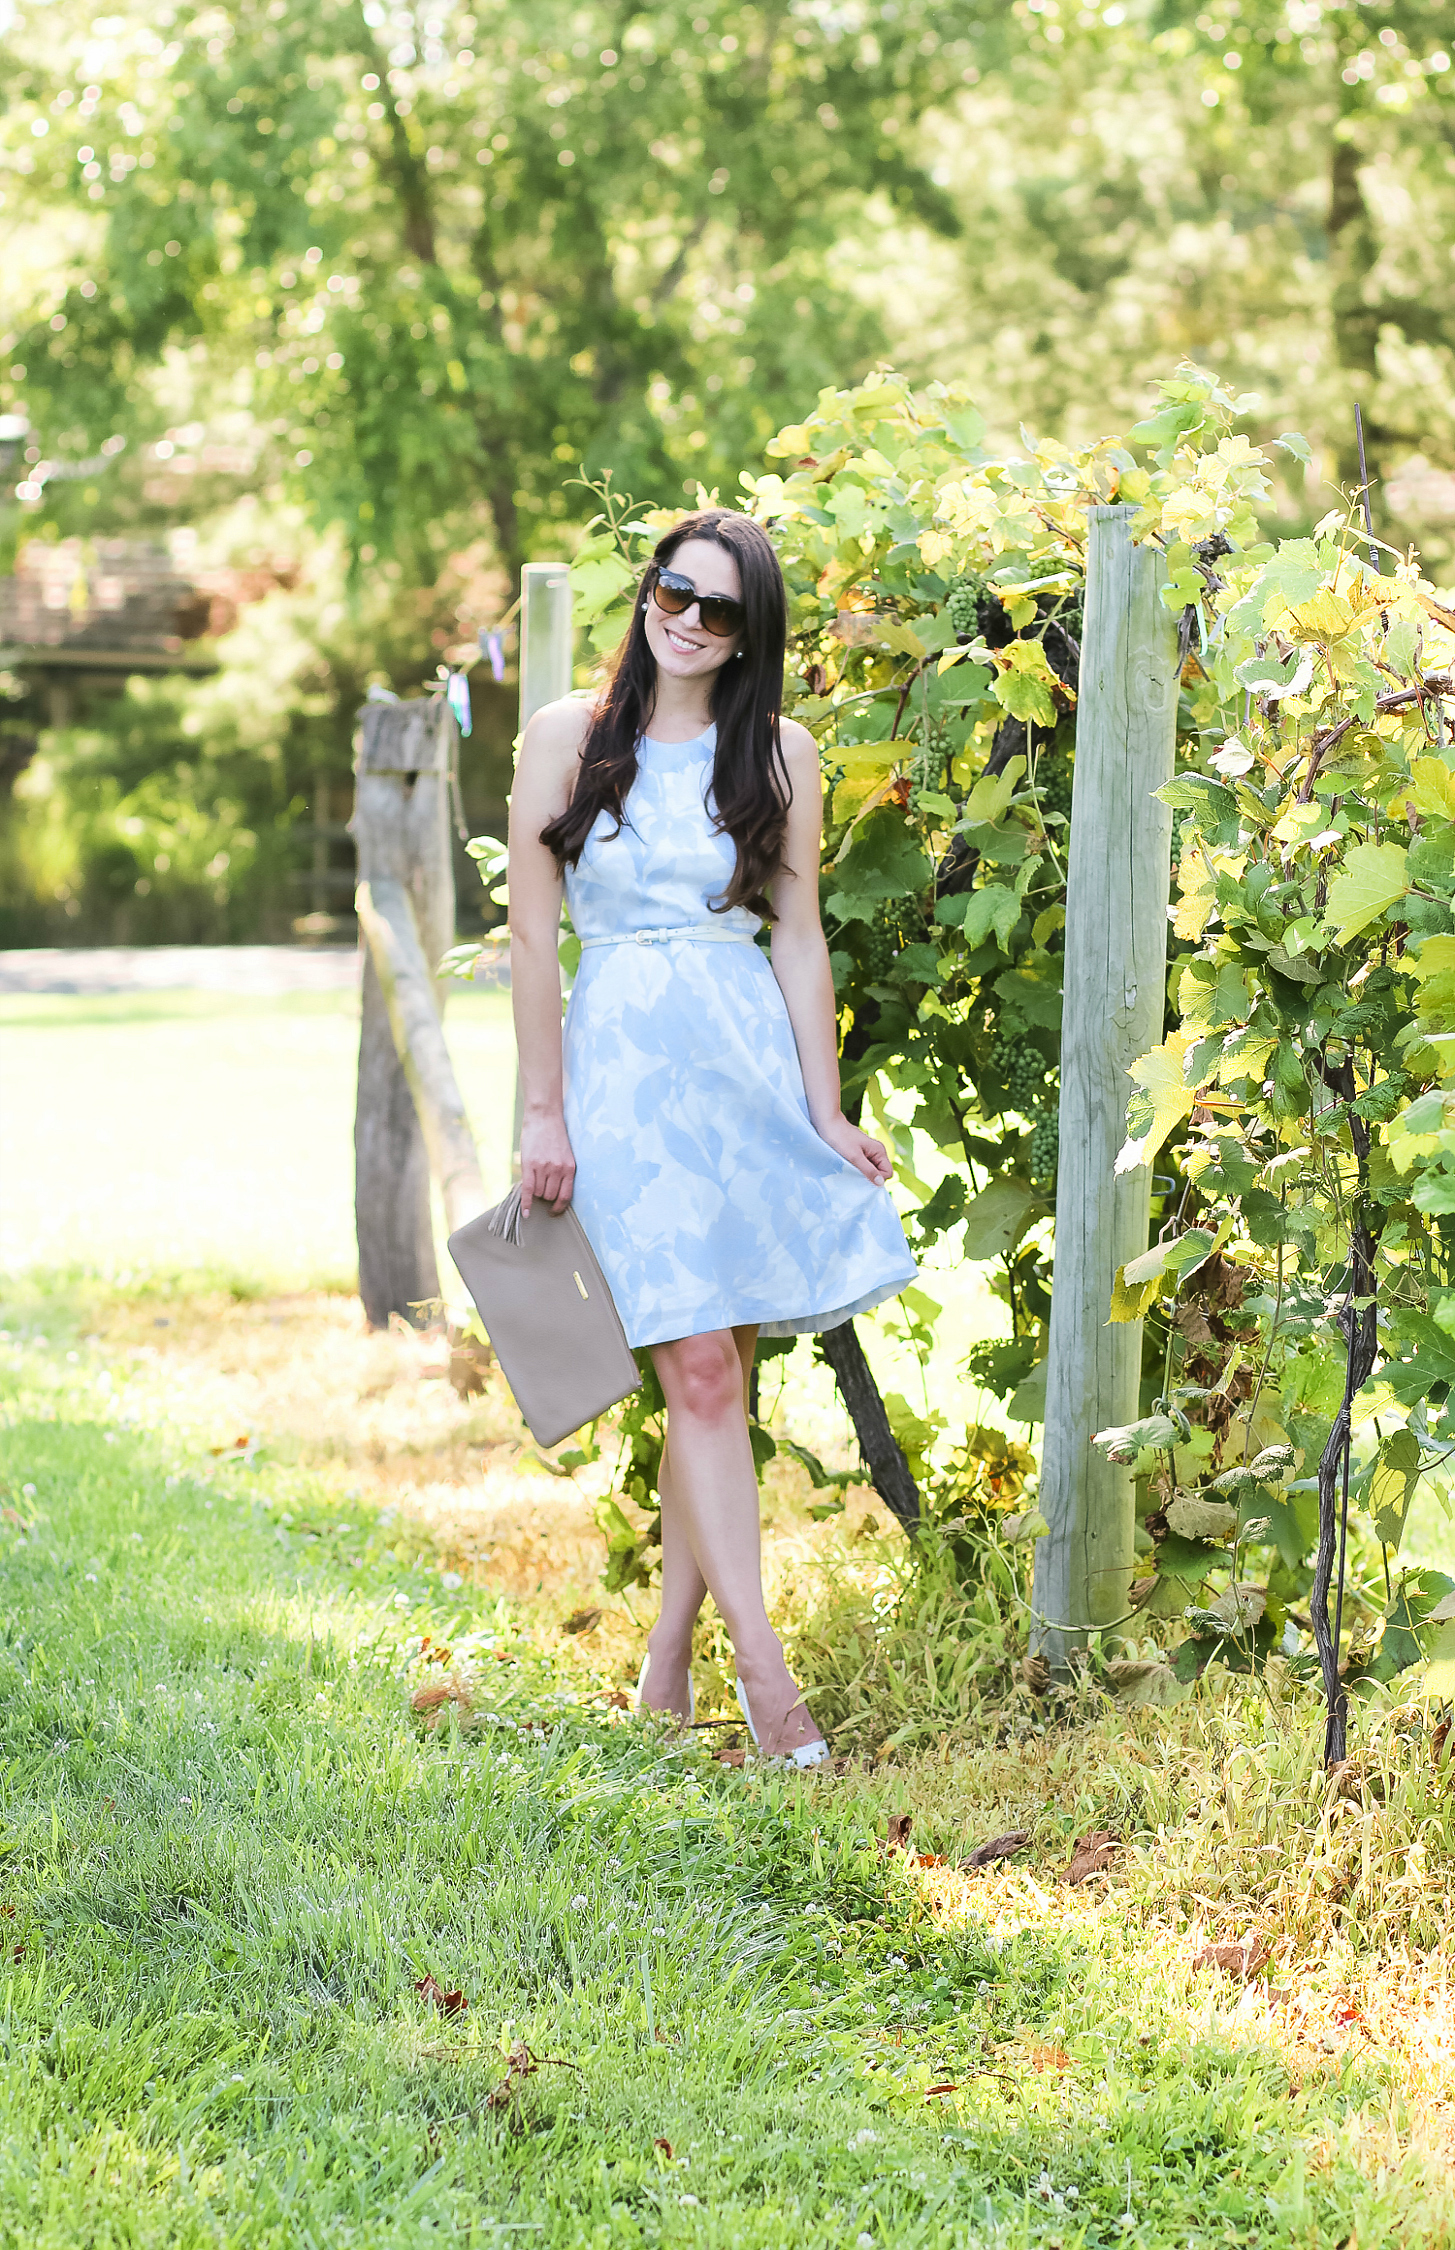 What to Wear to a Wine Tasting: Banana Republic Floral Fit and Flare Dress